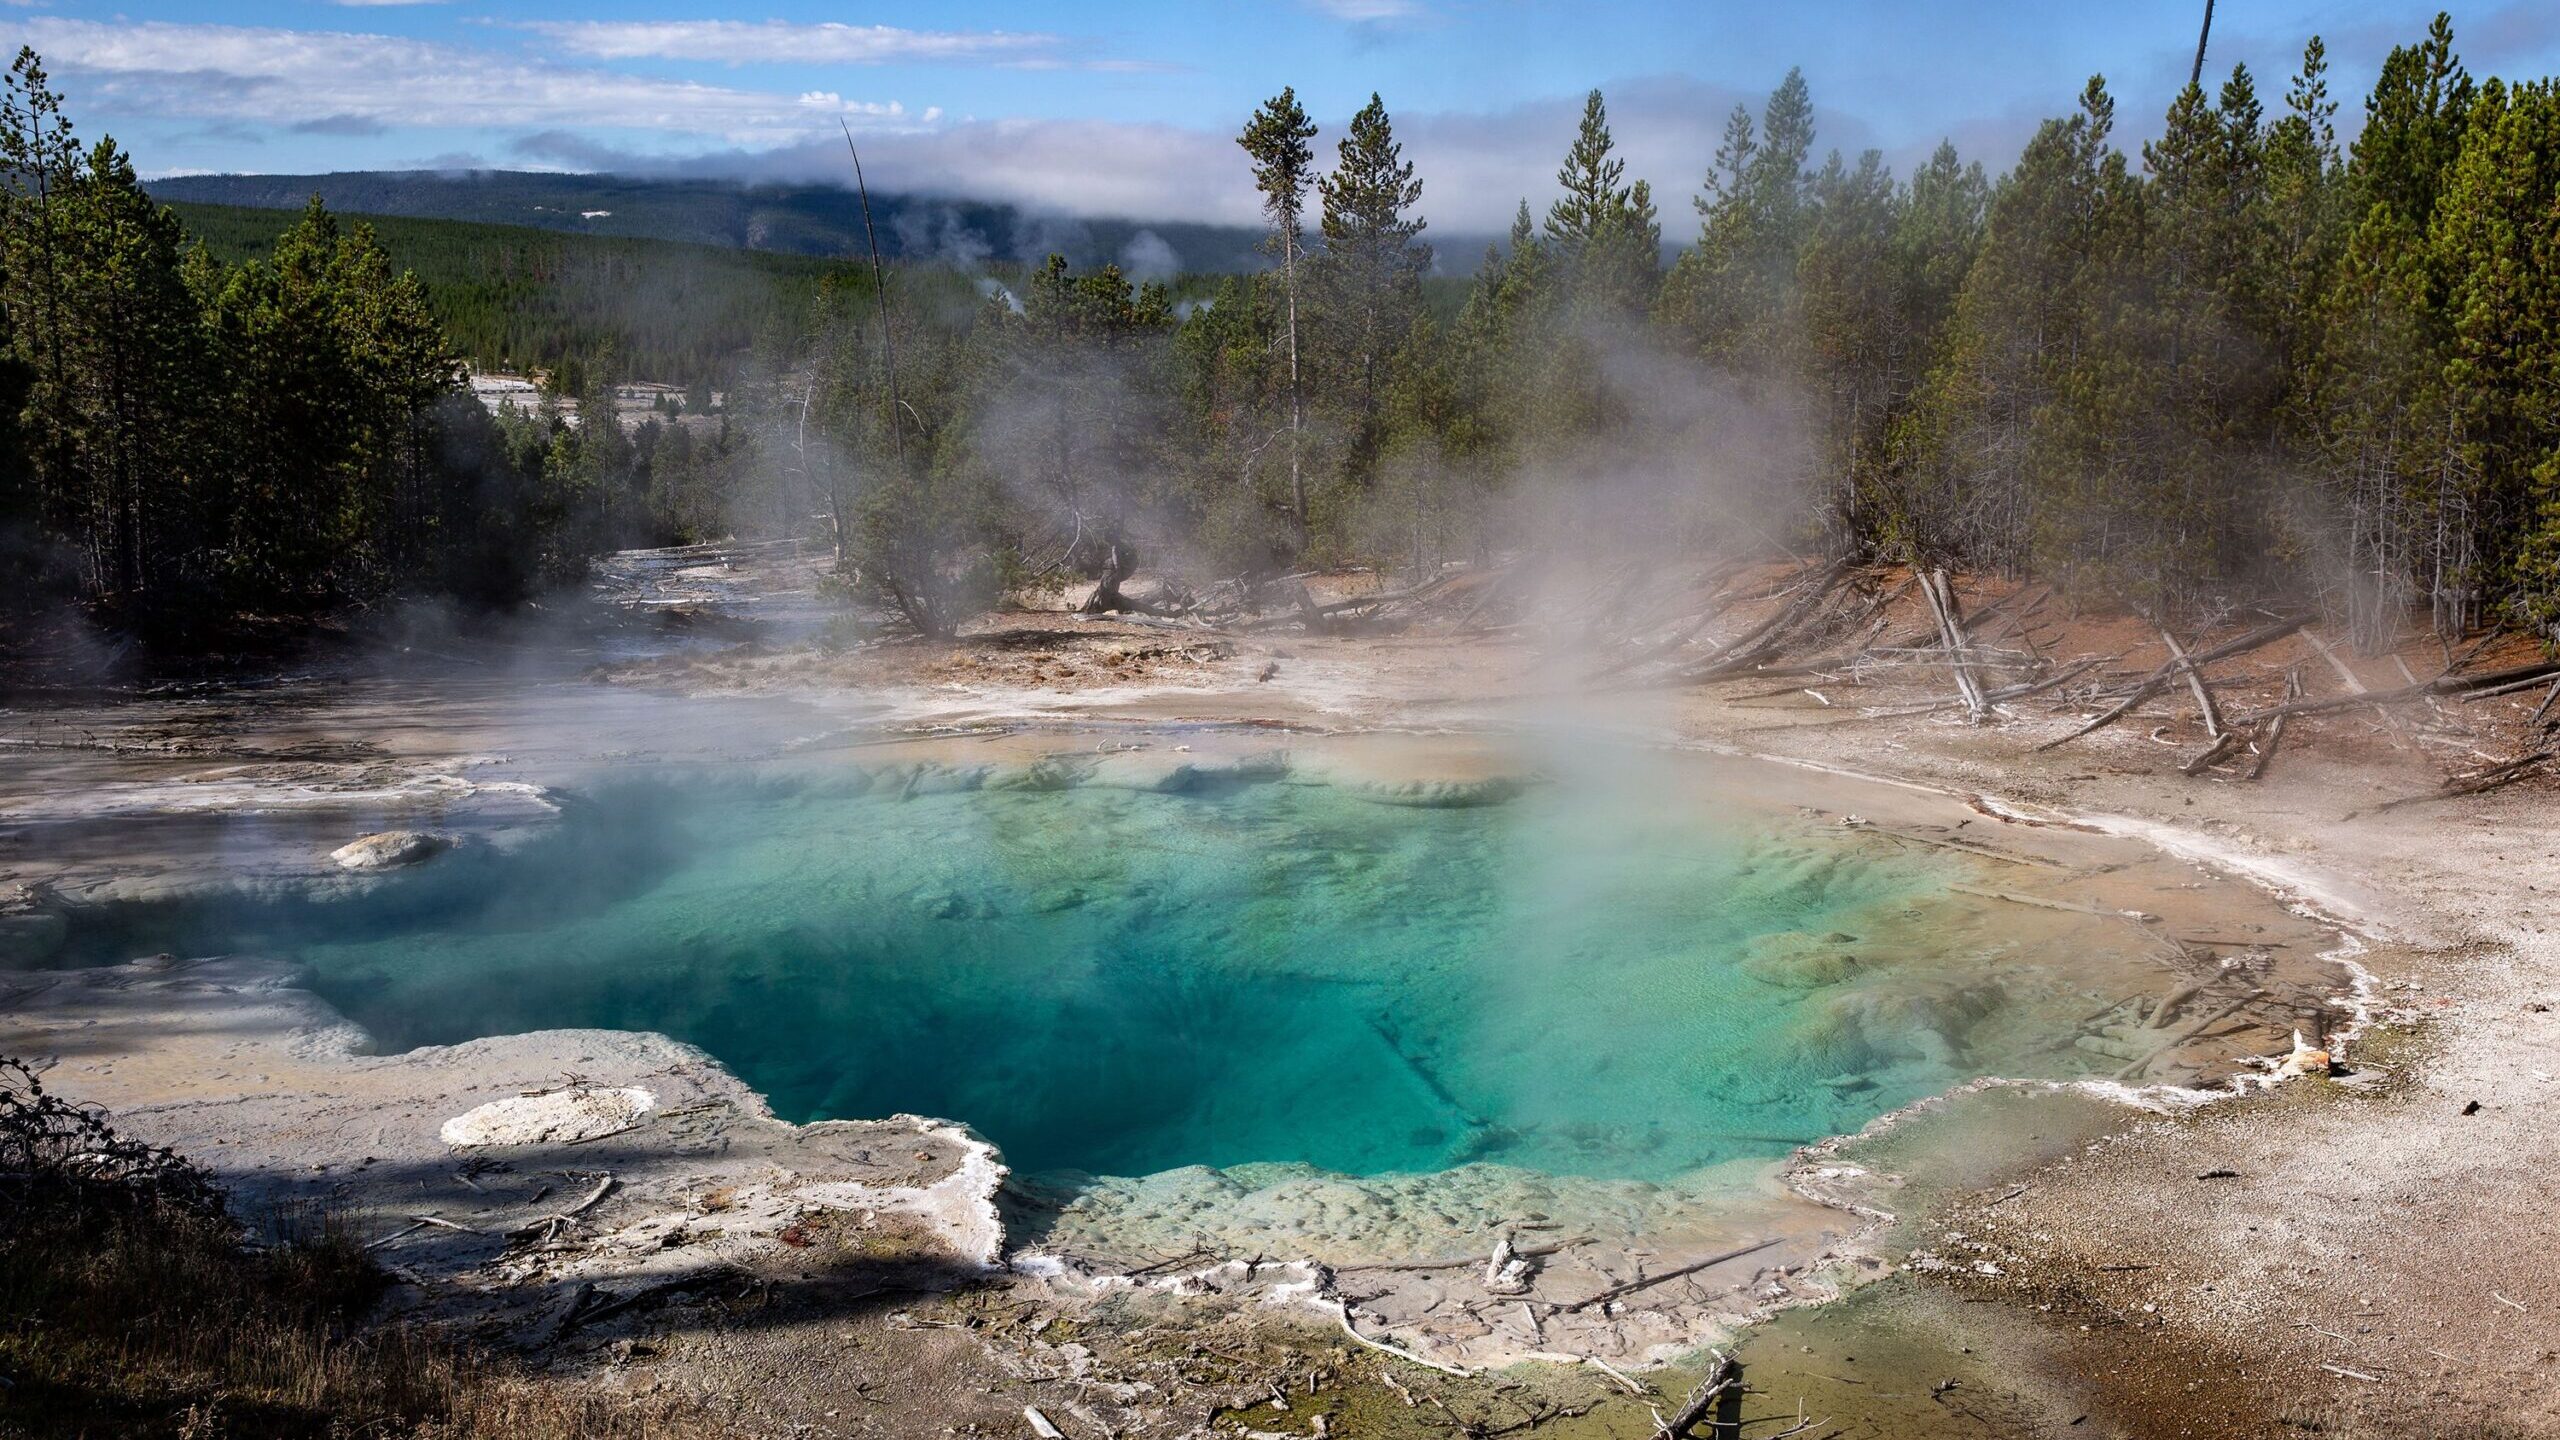 Yellowstone National Park officials cautioned that the ground in thermal areas is fragile and thin,...